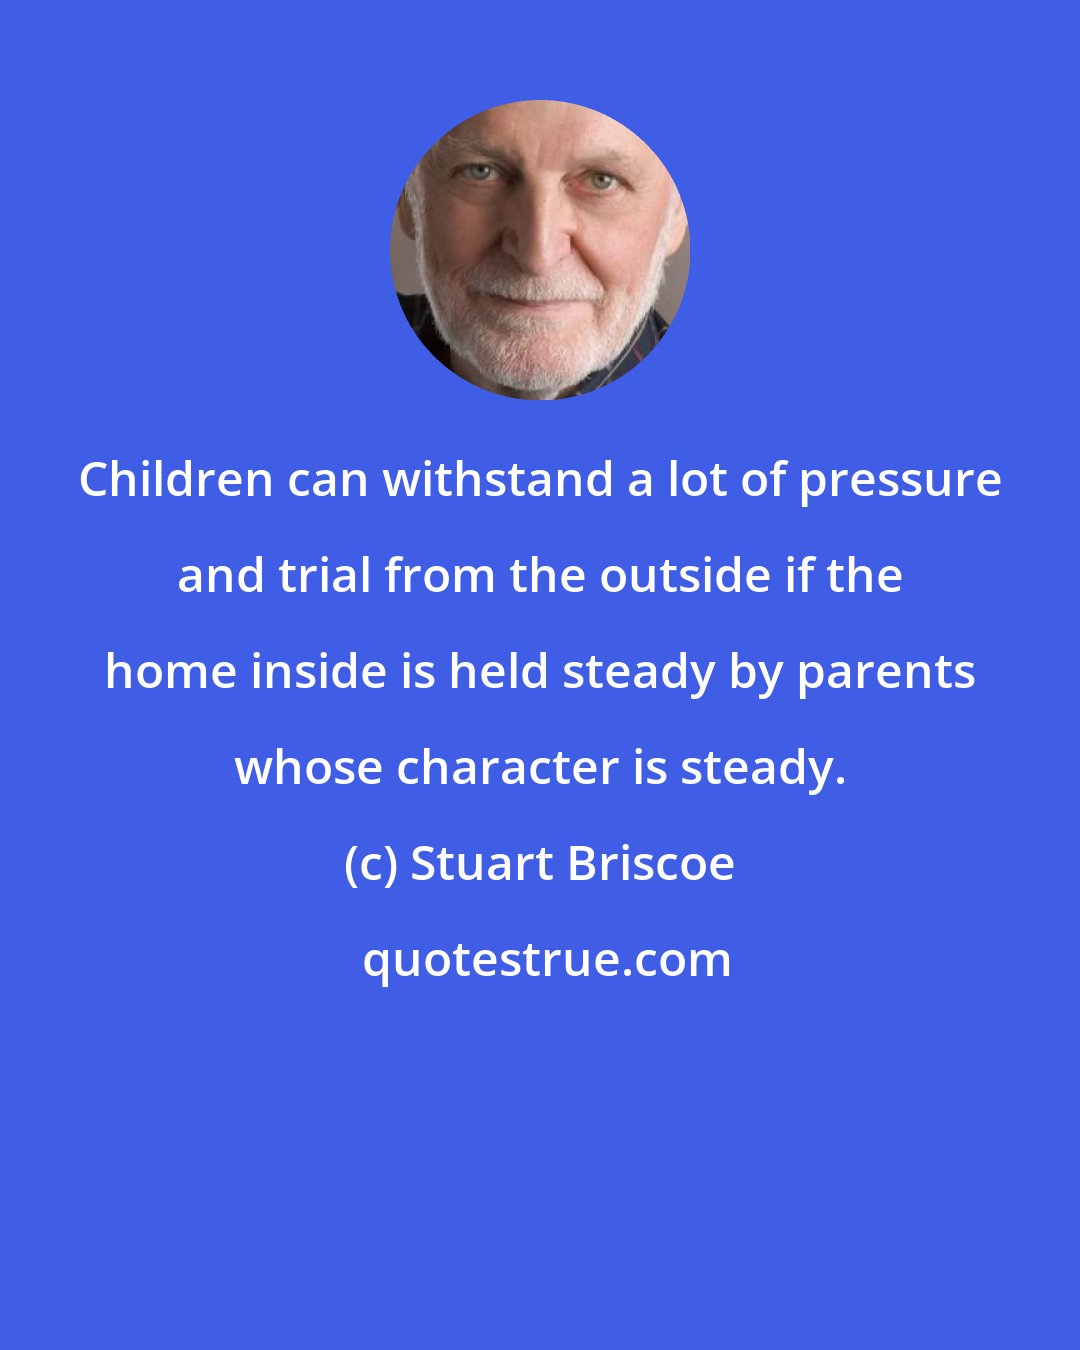 Stuart Briscoe: Children can withstand a lot of pressure and trial from the outside if the home inside is held steady by parents whose character is steady.